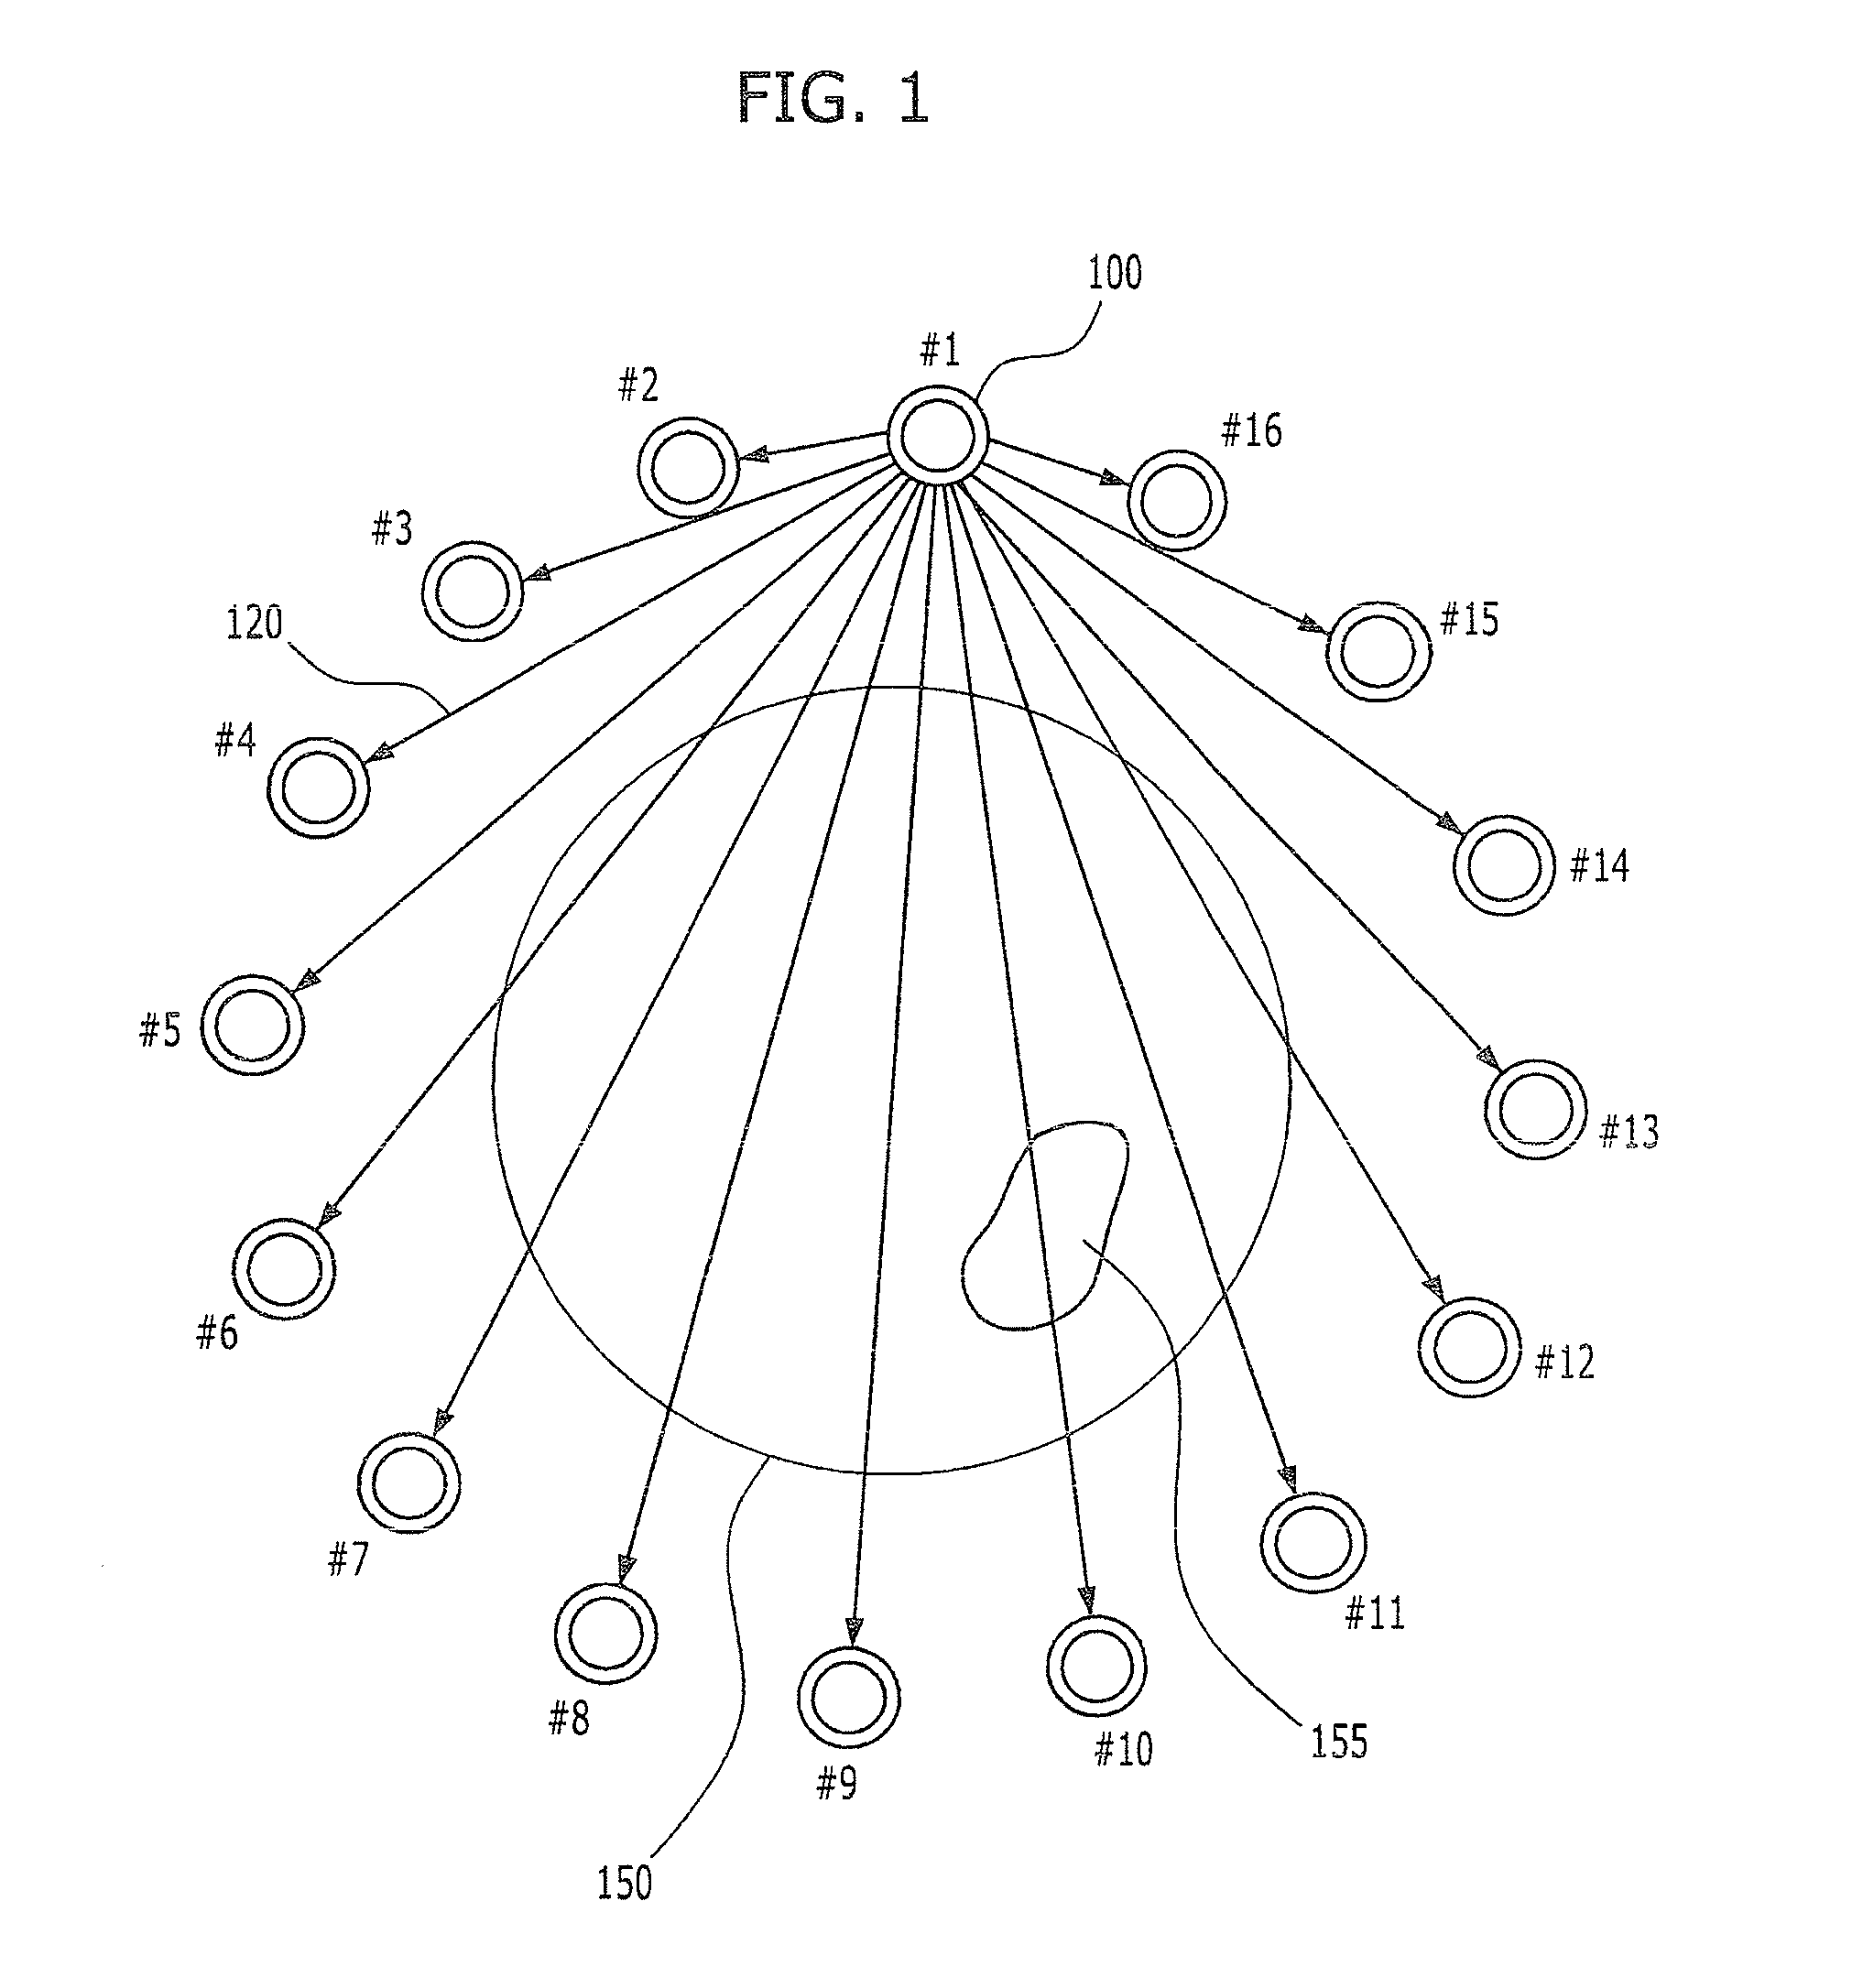 Microwave image reconstruction apparatus and method